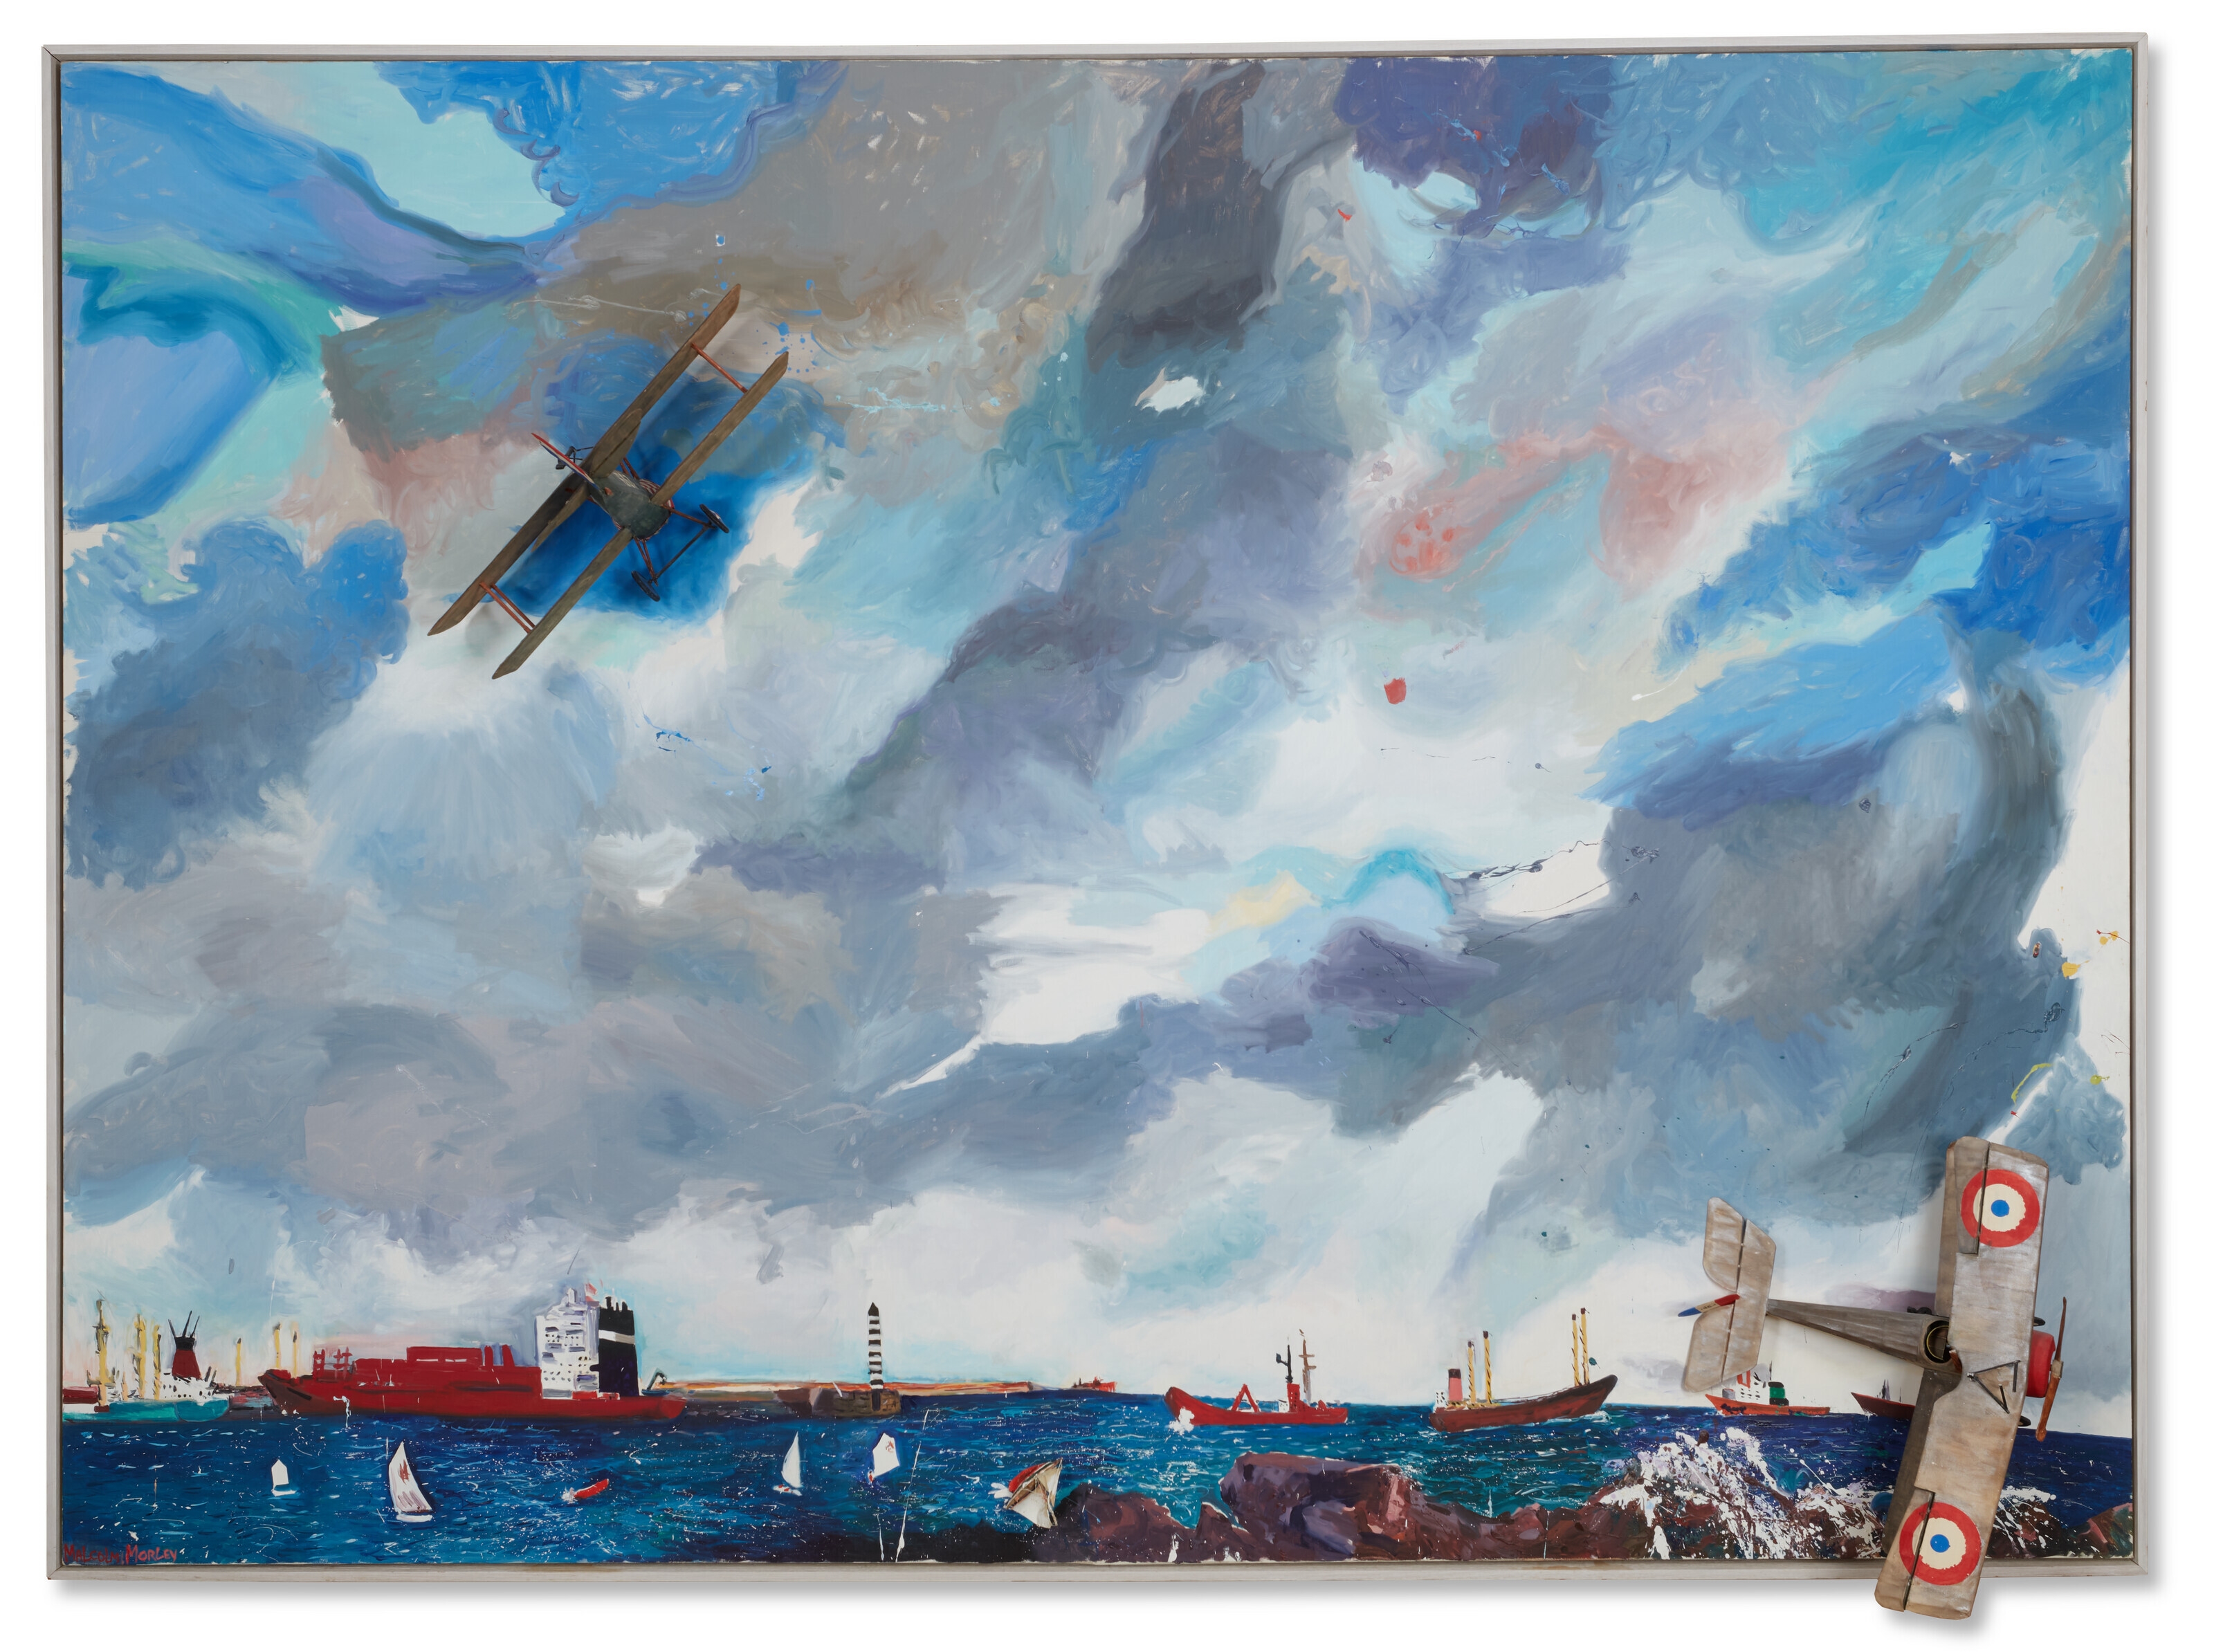 Artwork by Malcolm Morley, Icarus, Made of oil on canvas with painted paper airplanes and boat, with electric motor